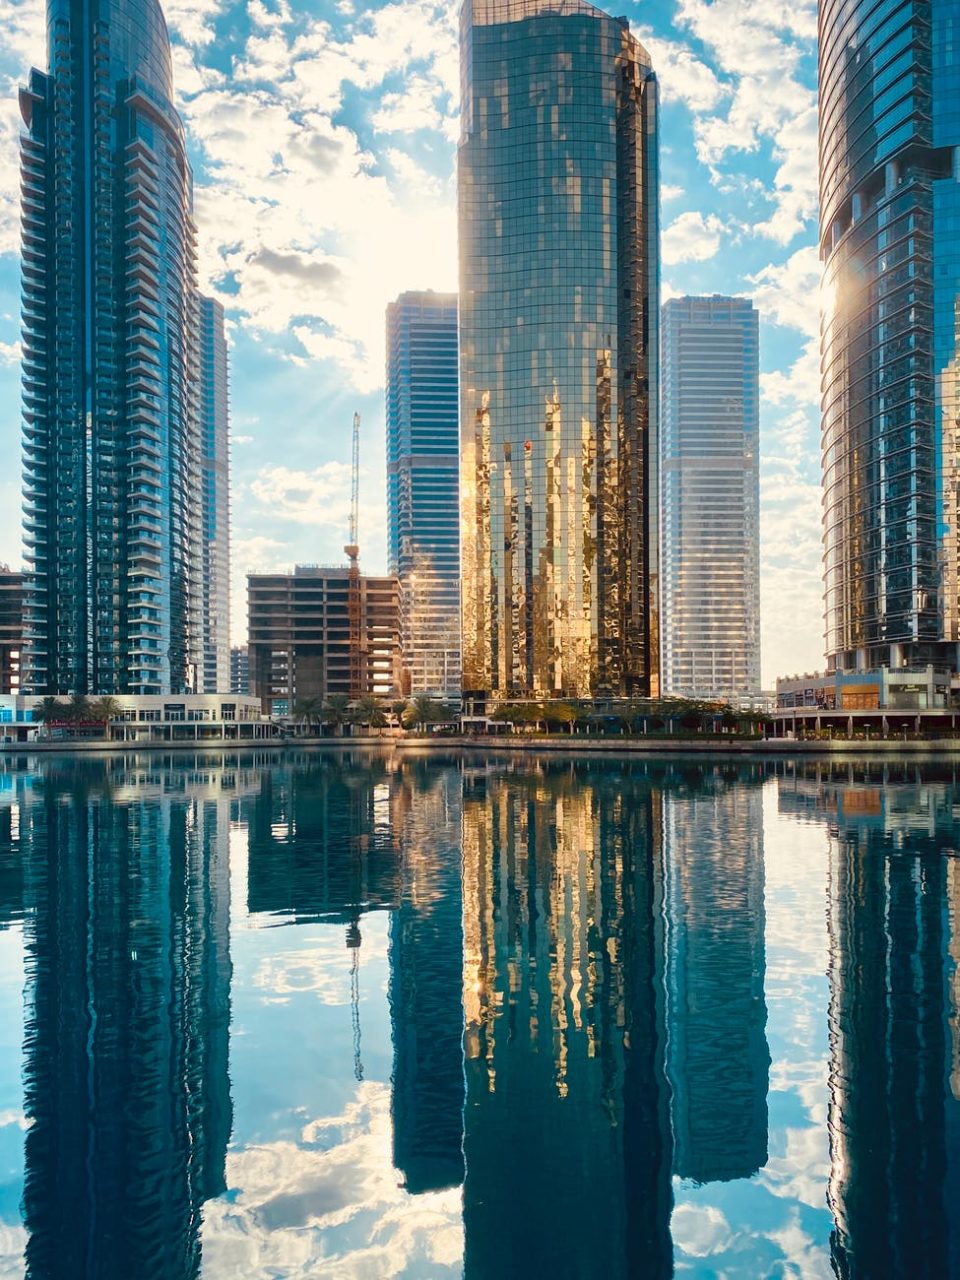 modern city district with skyscrapers reflecting in pond